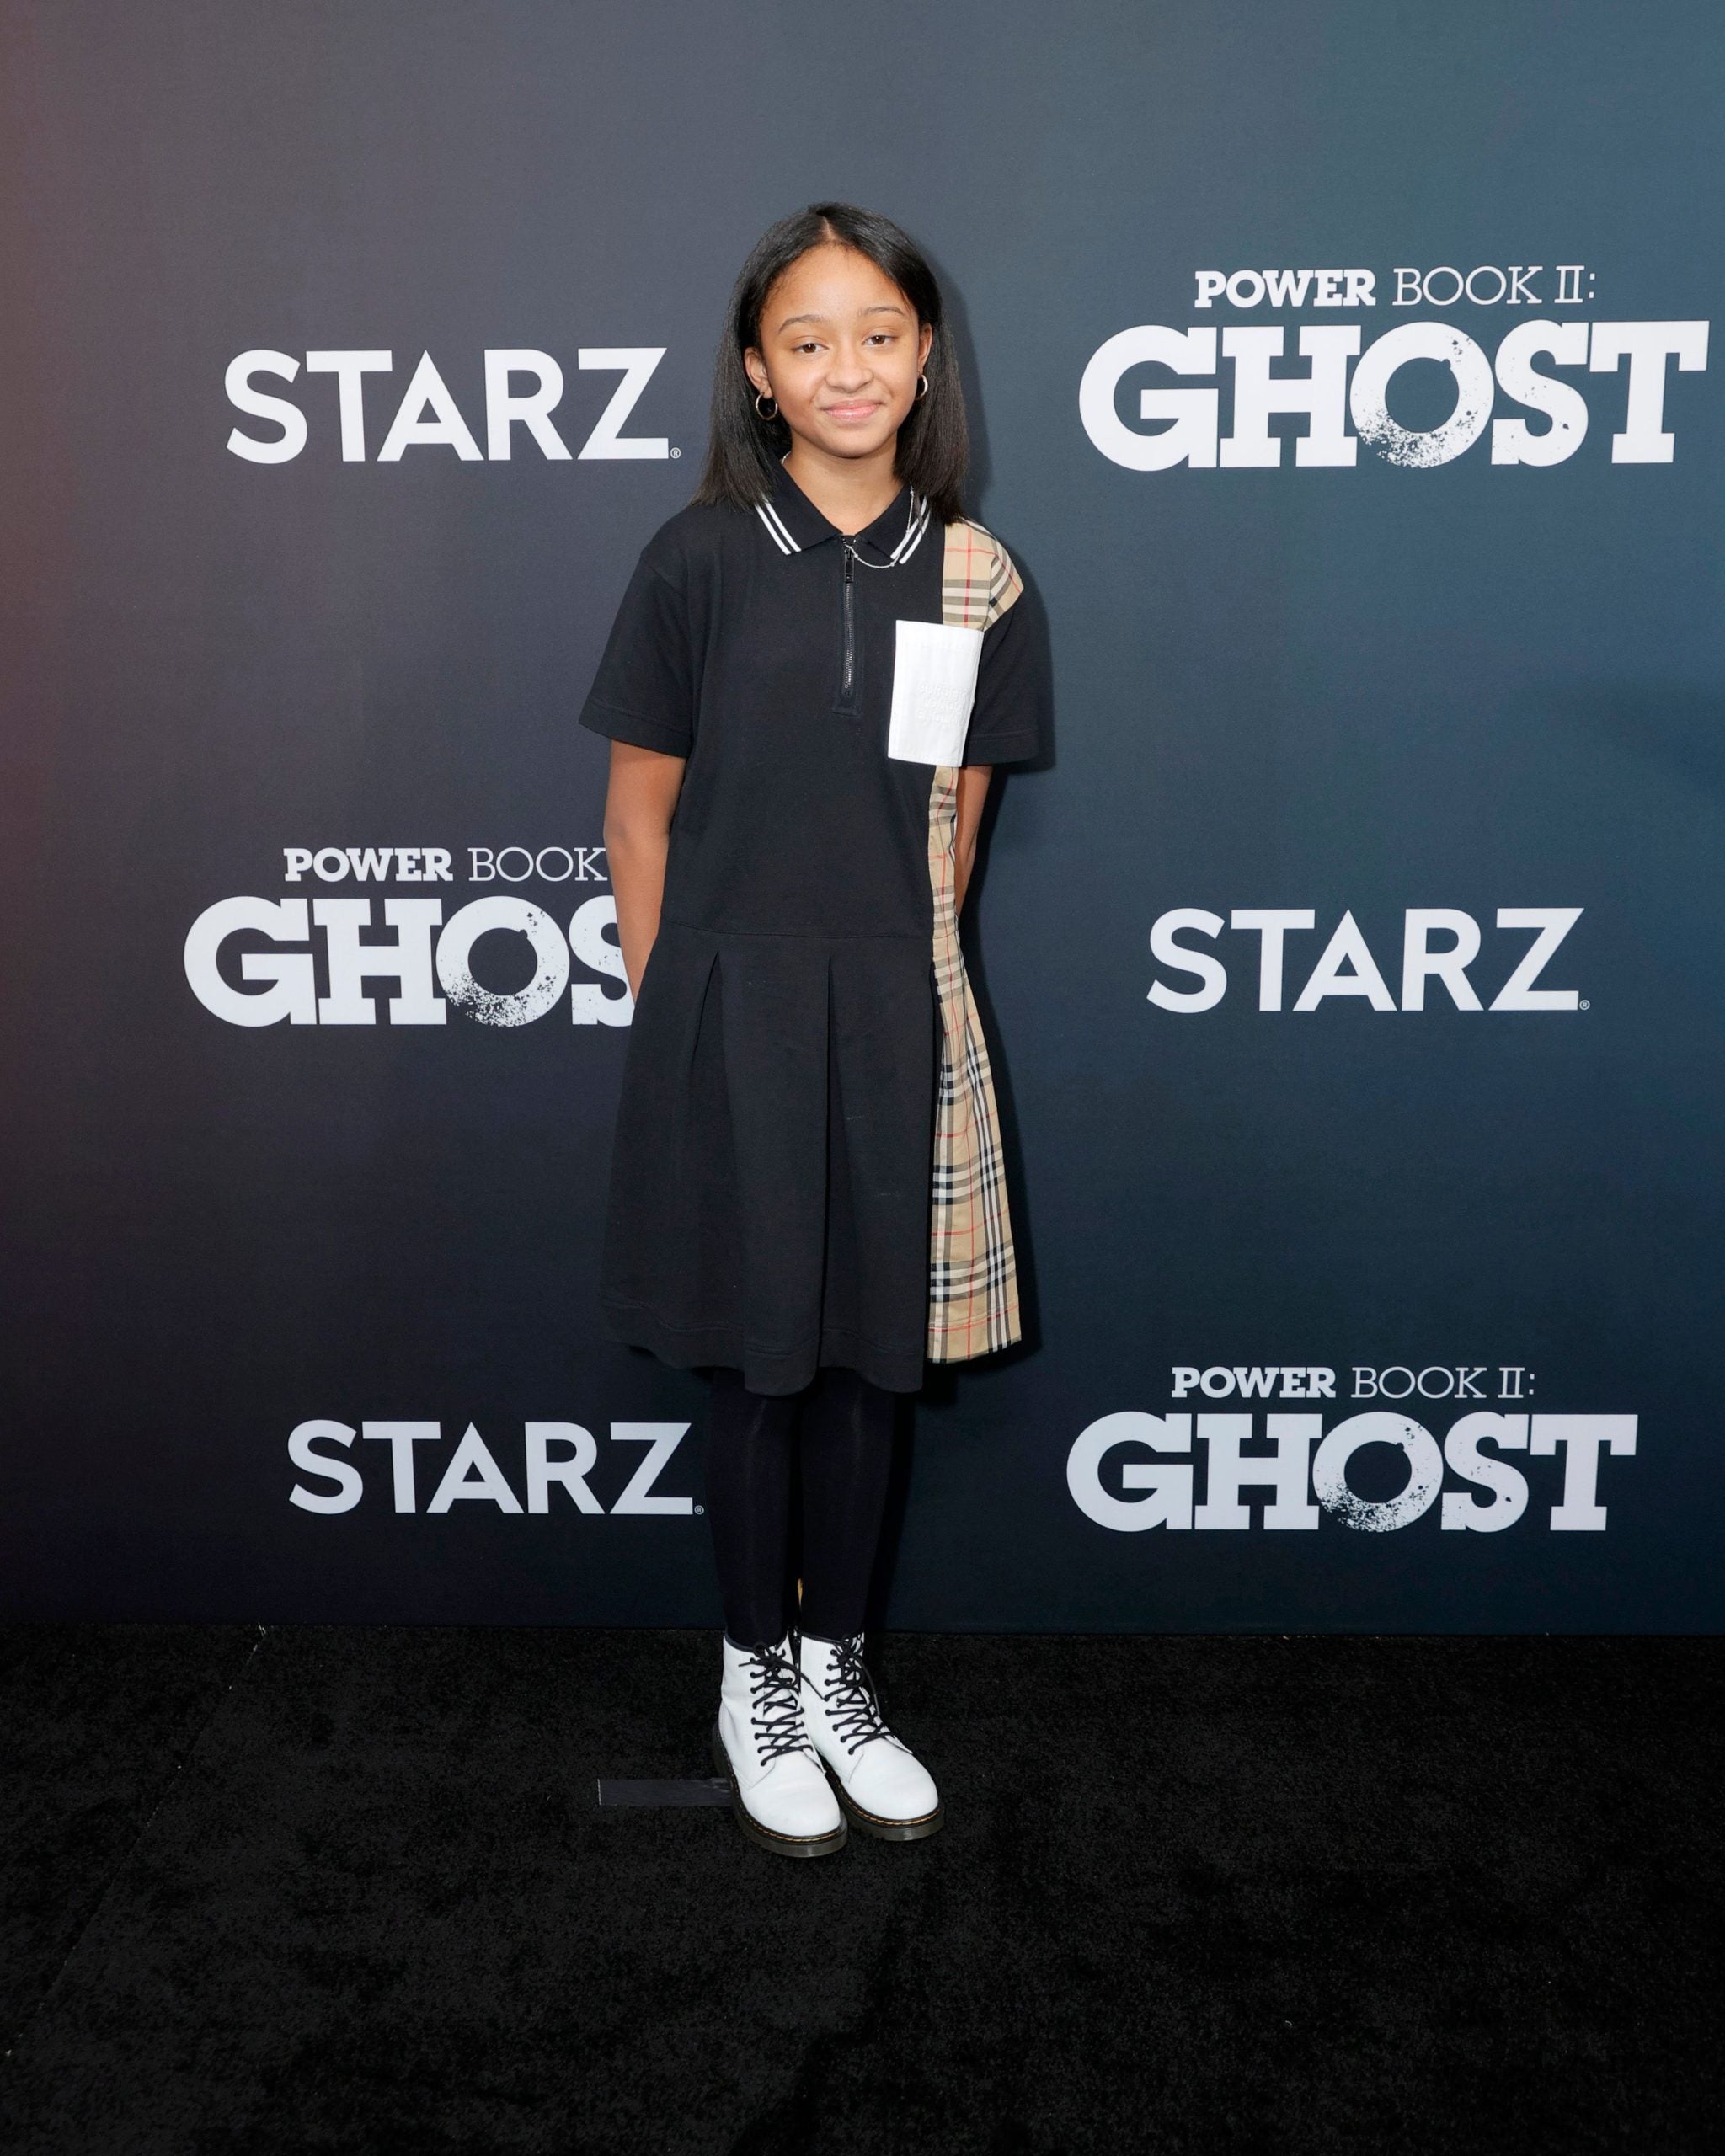 Stars Turned Up And Showed Out For Starz’s “Power Book II: Ghost” Premiere Event in NYC